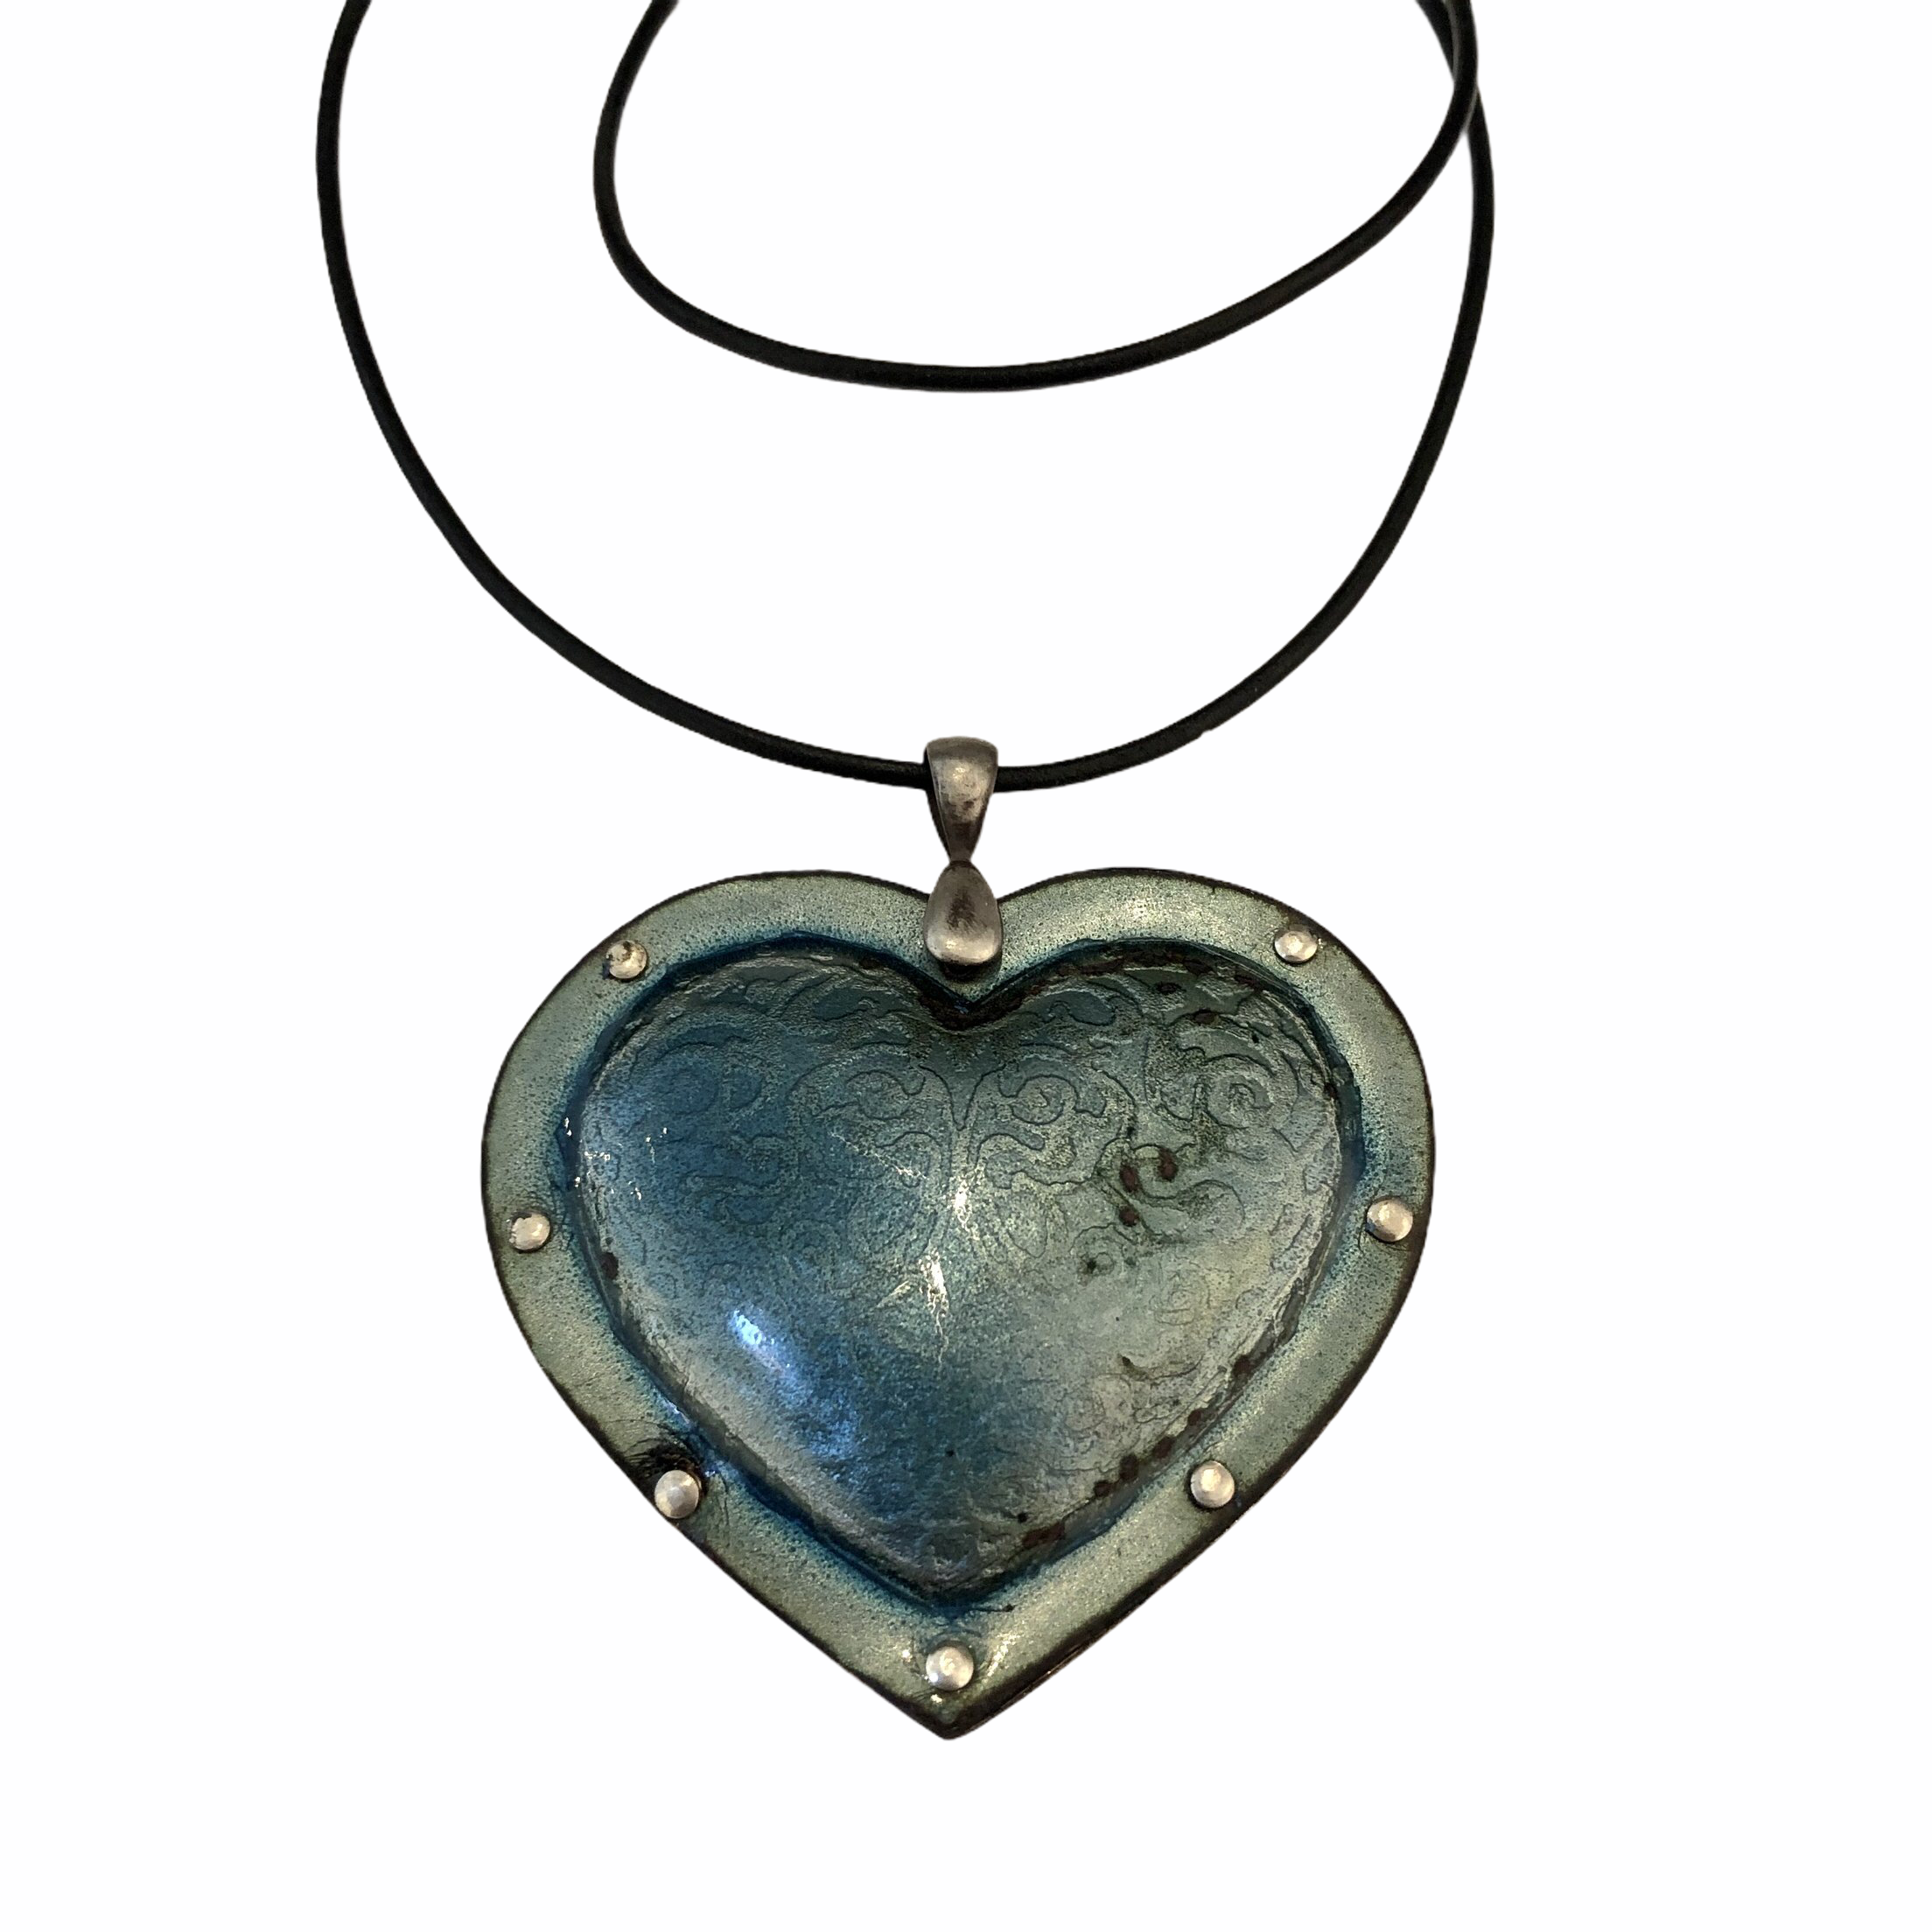 Fearless Heart Medium Enamel Pendant in various color and pattern